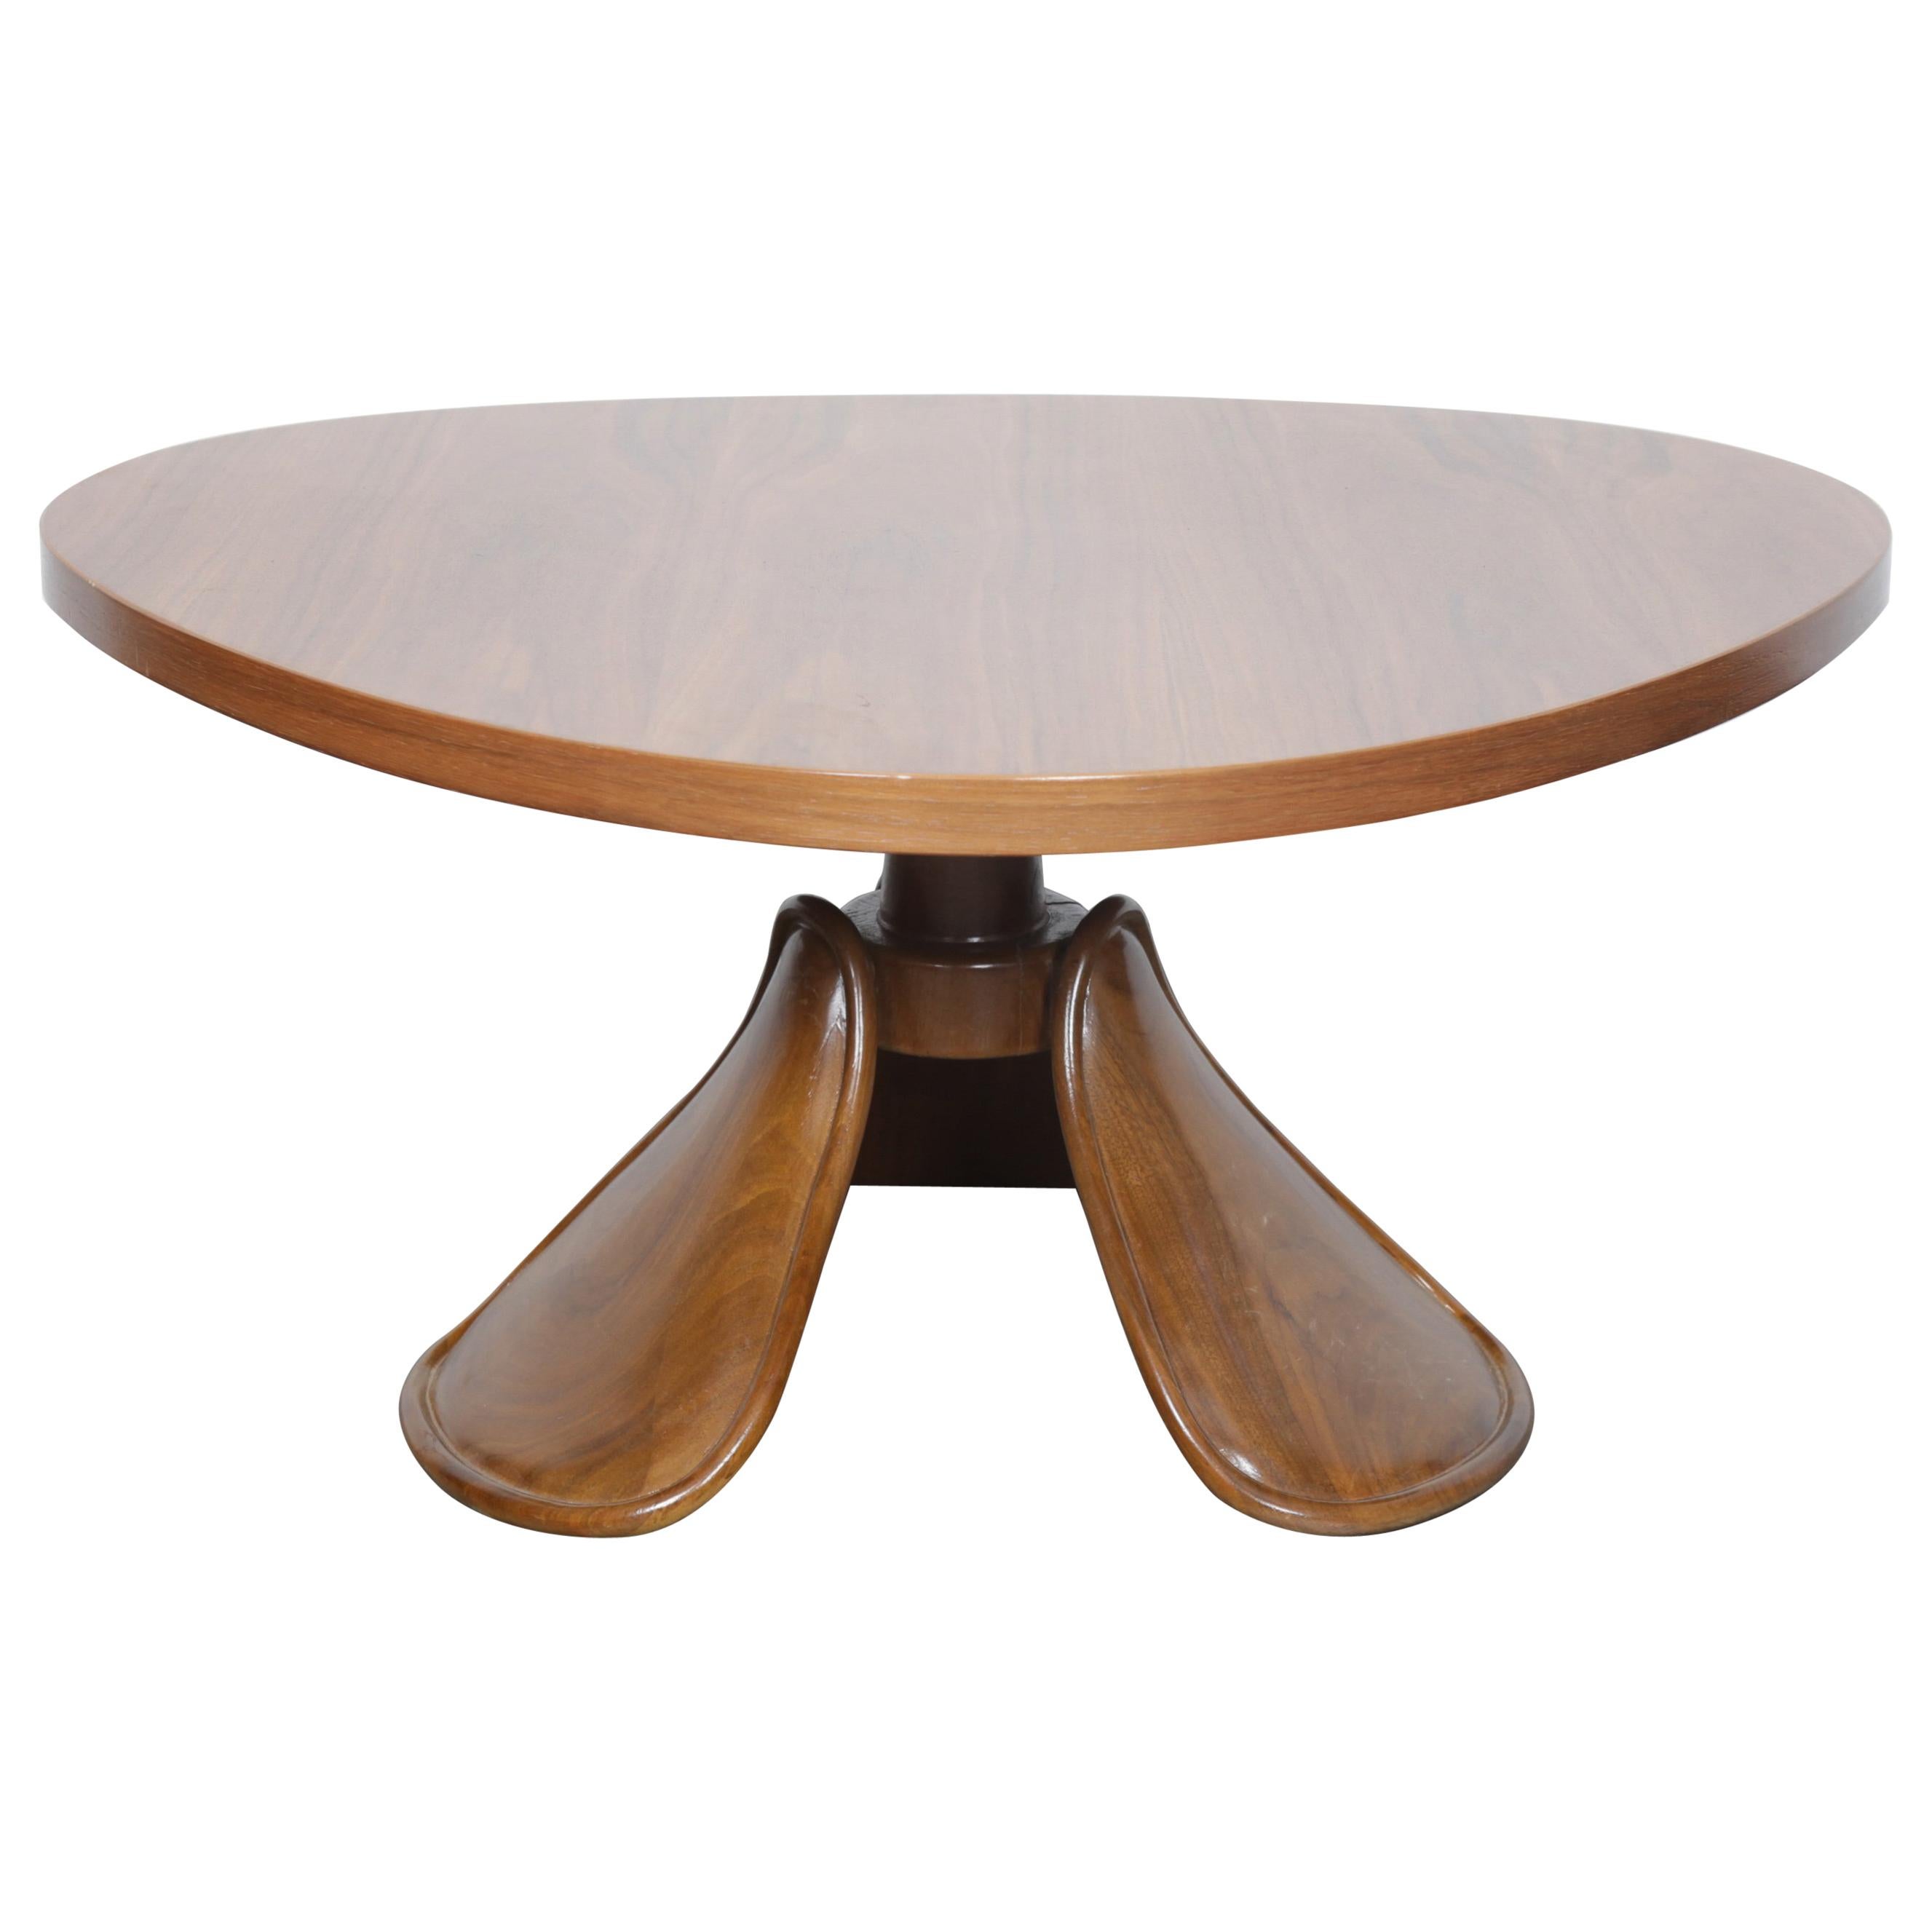 Midcentury Walnut Coffee Table with Organic Rounded Top and Leaf Style Legs